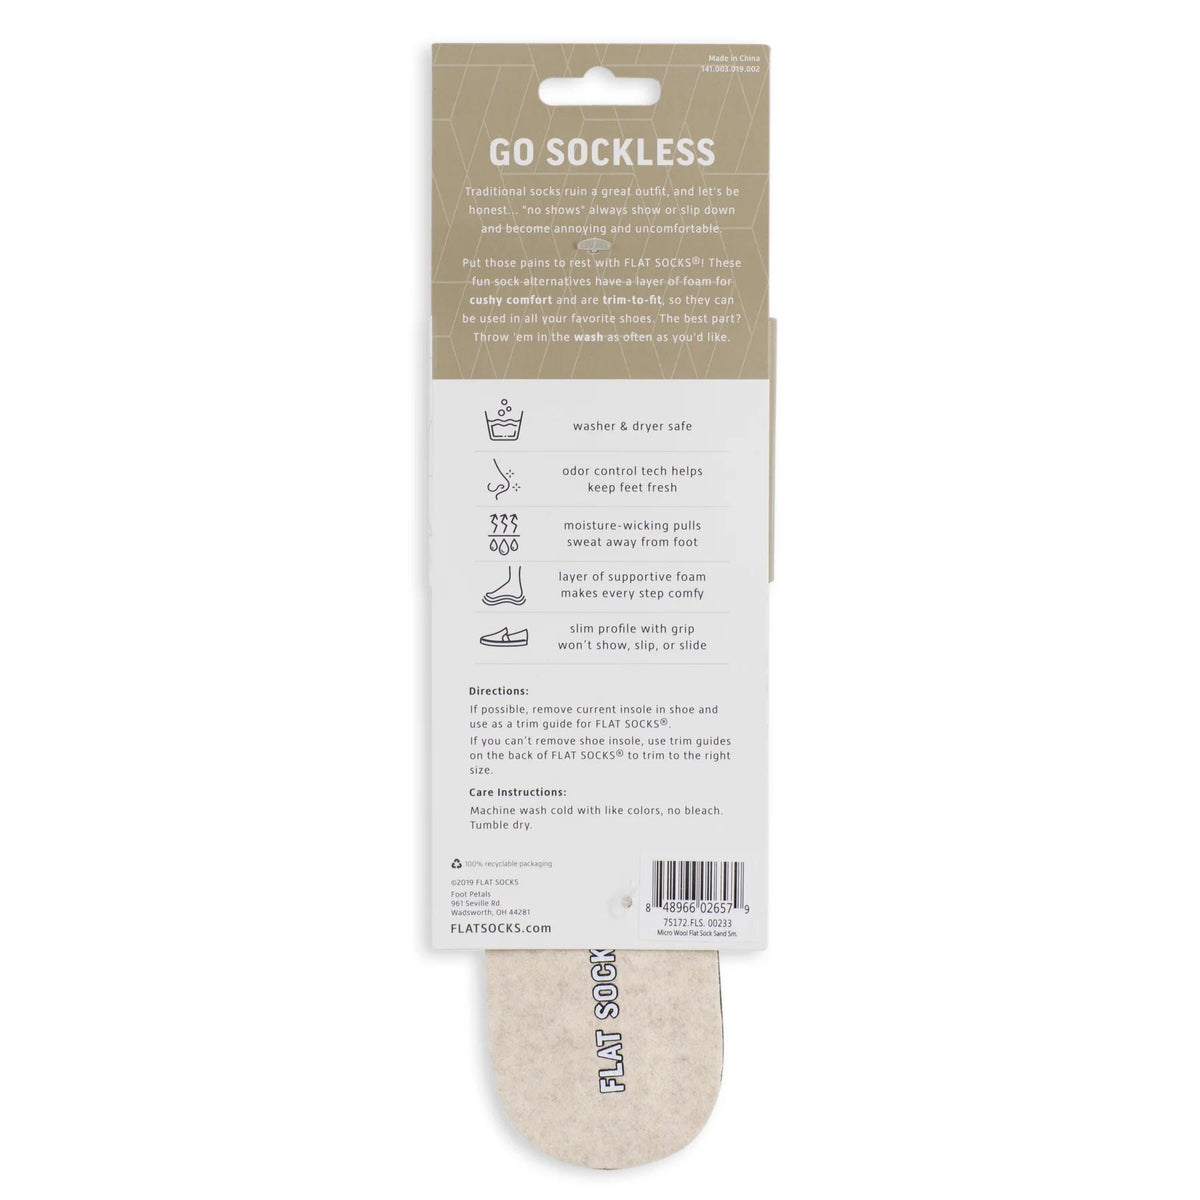 Packaging of FLAT SOCKS SAND MICRO WOOL - WOMENS odor control shoe inserts featuring trim-to-fit design, displaying product features and usage instructions.